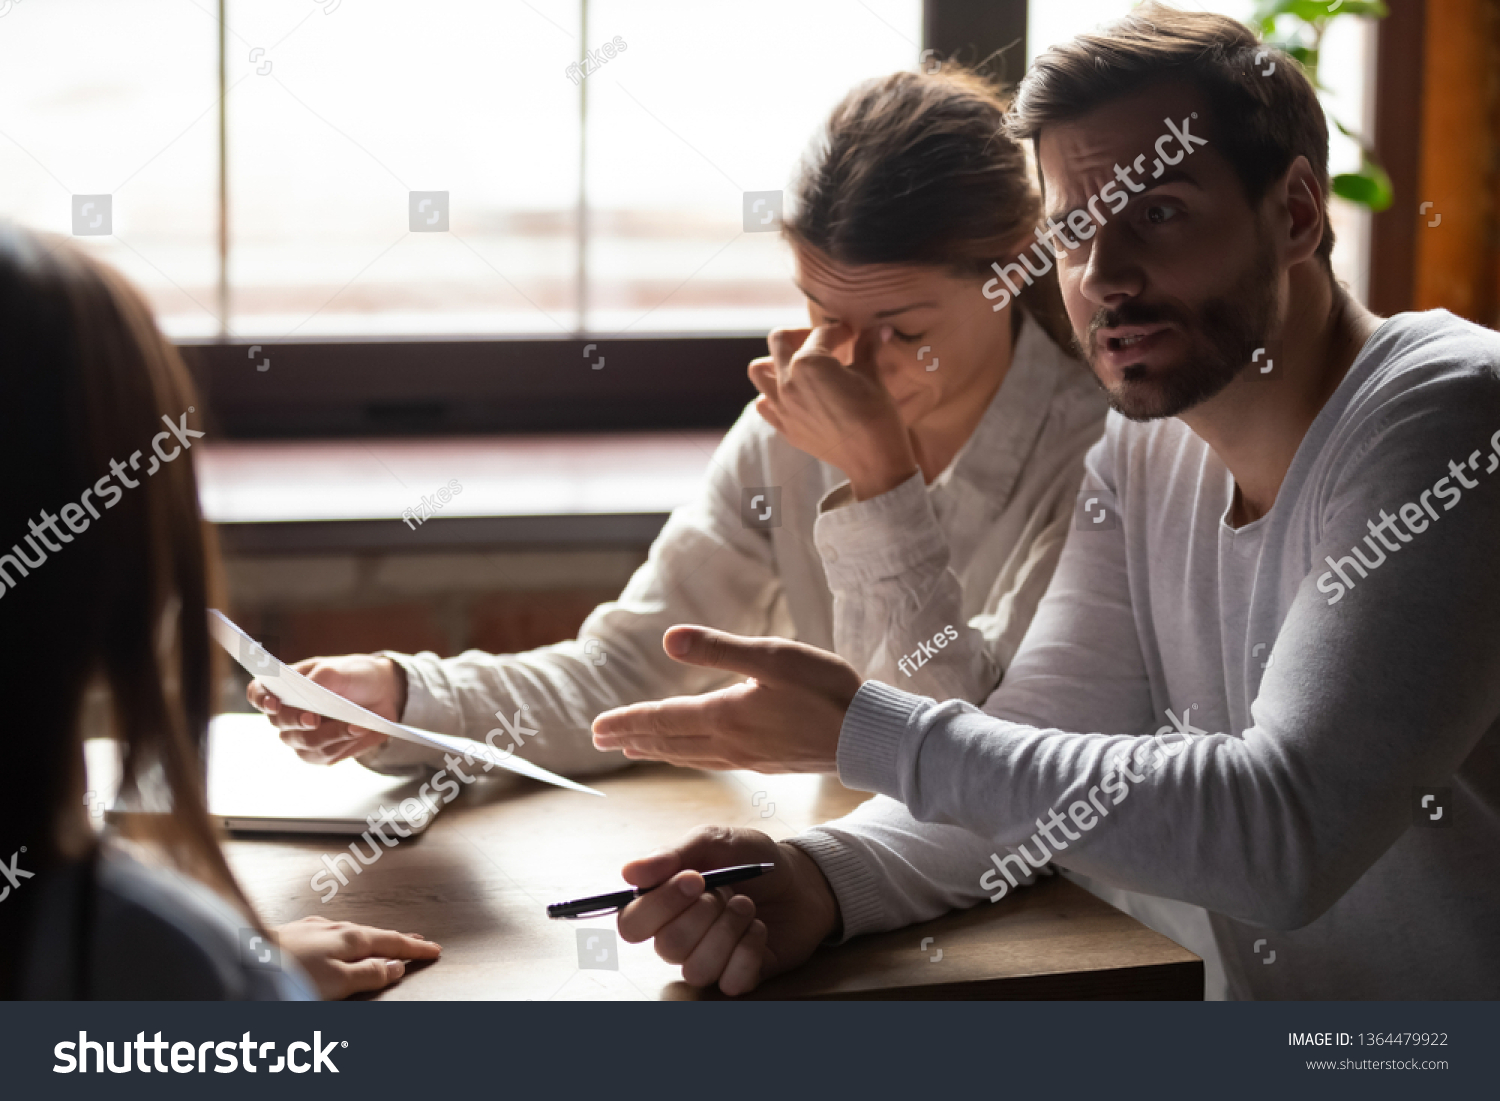 Diverse millennial people sitting at table in office indignant man accusing incompetent unqualified woman colleague pointing on financial report with mistakes, lack of education and knowledge concept #1364479922